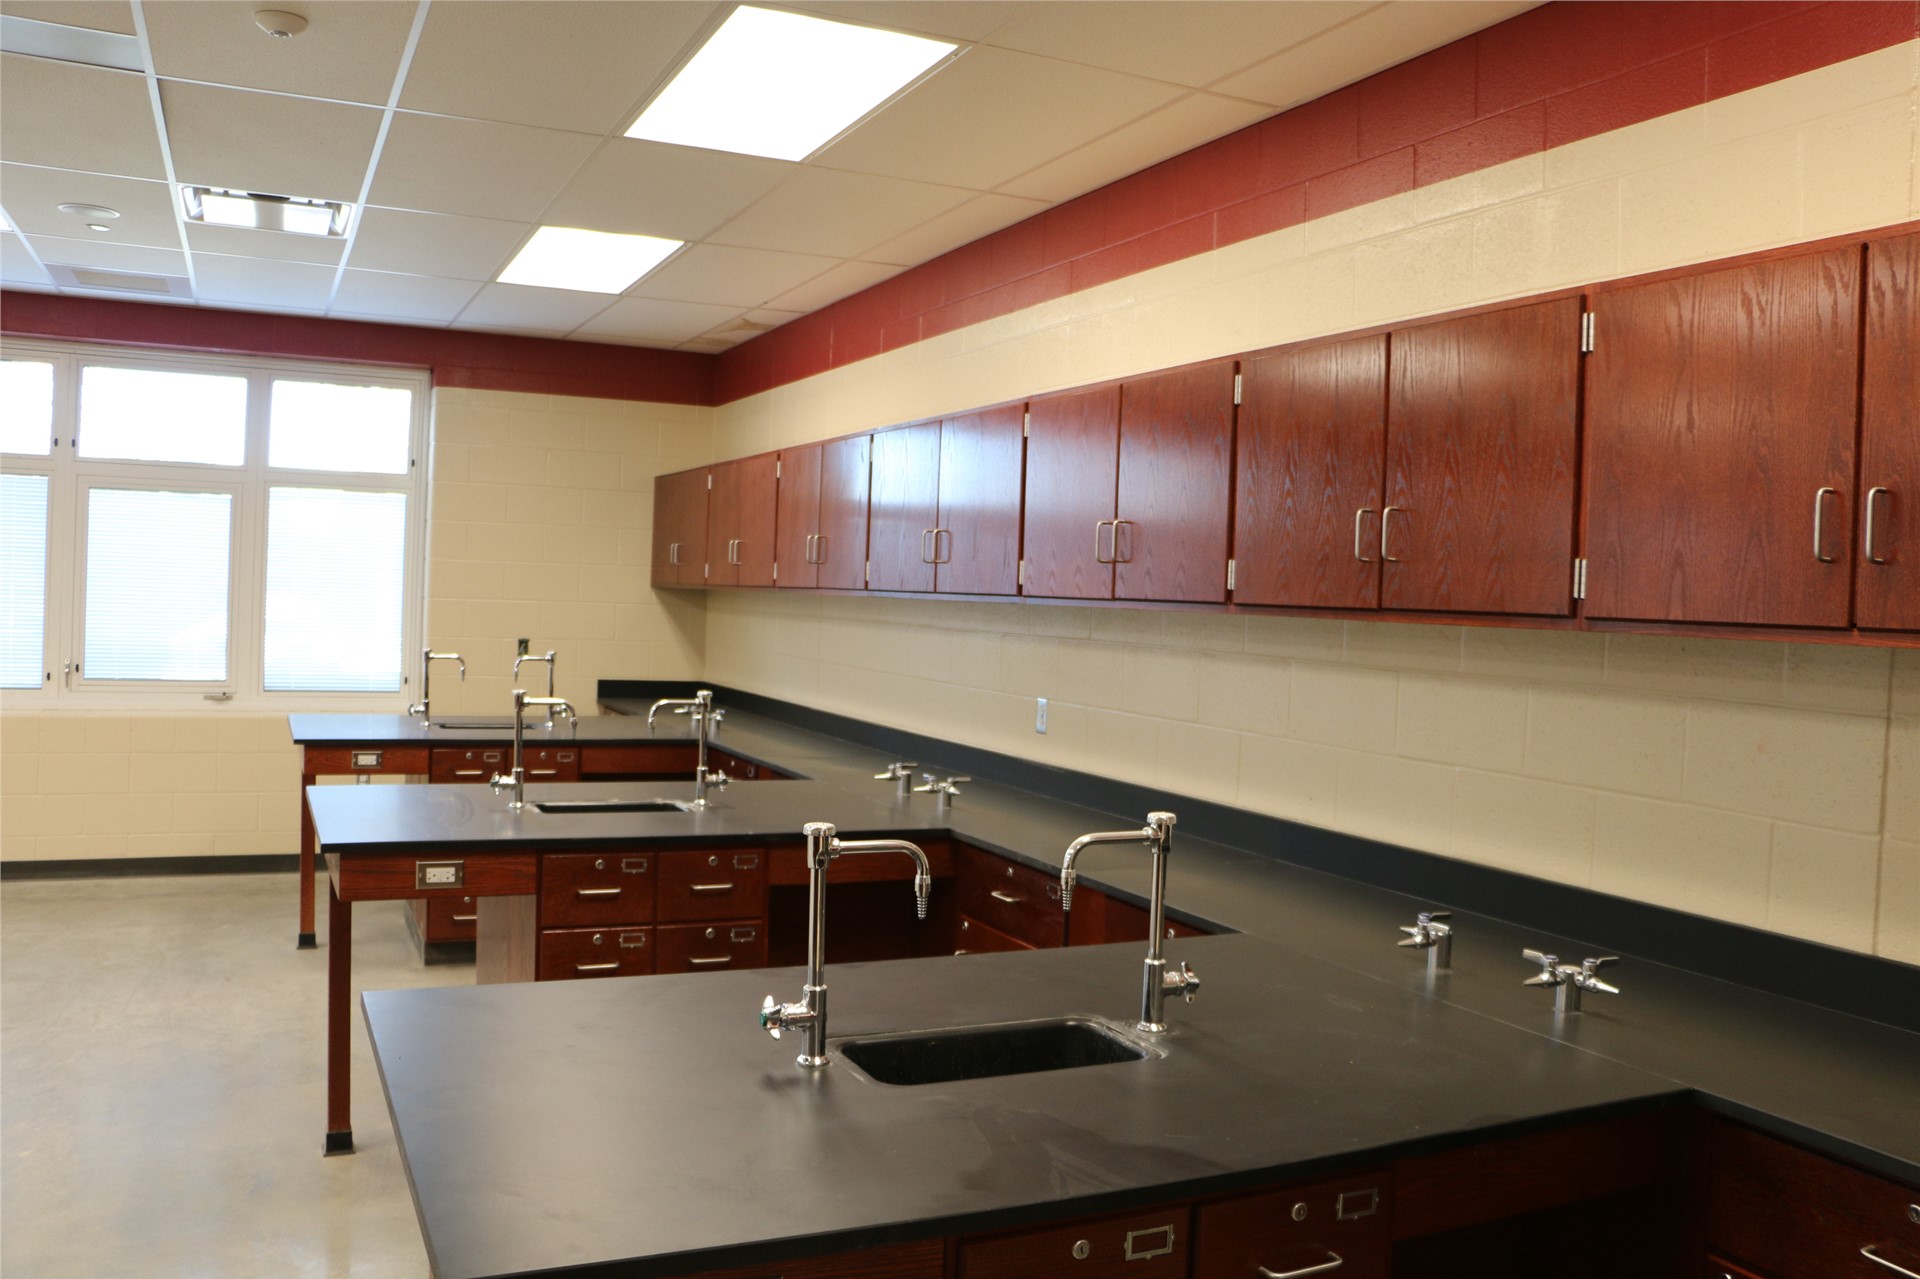 Typical Science Classroom/Lab - Back Wall